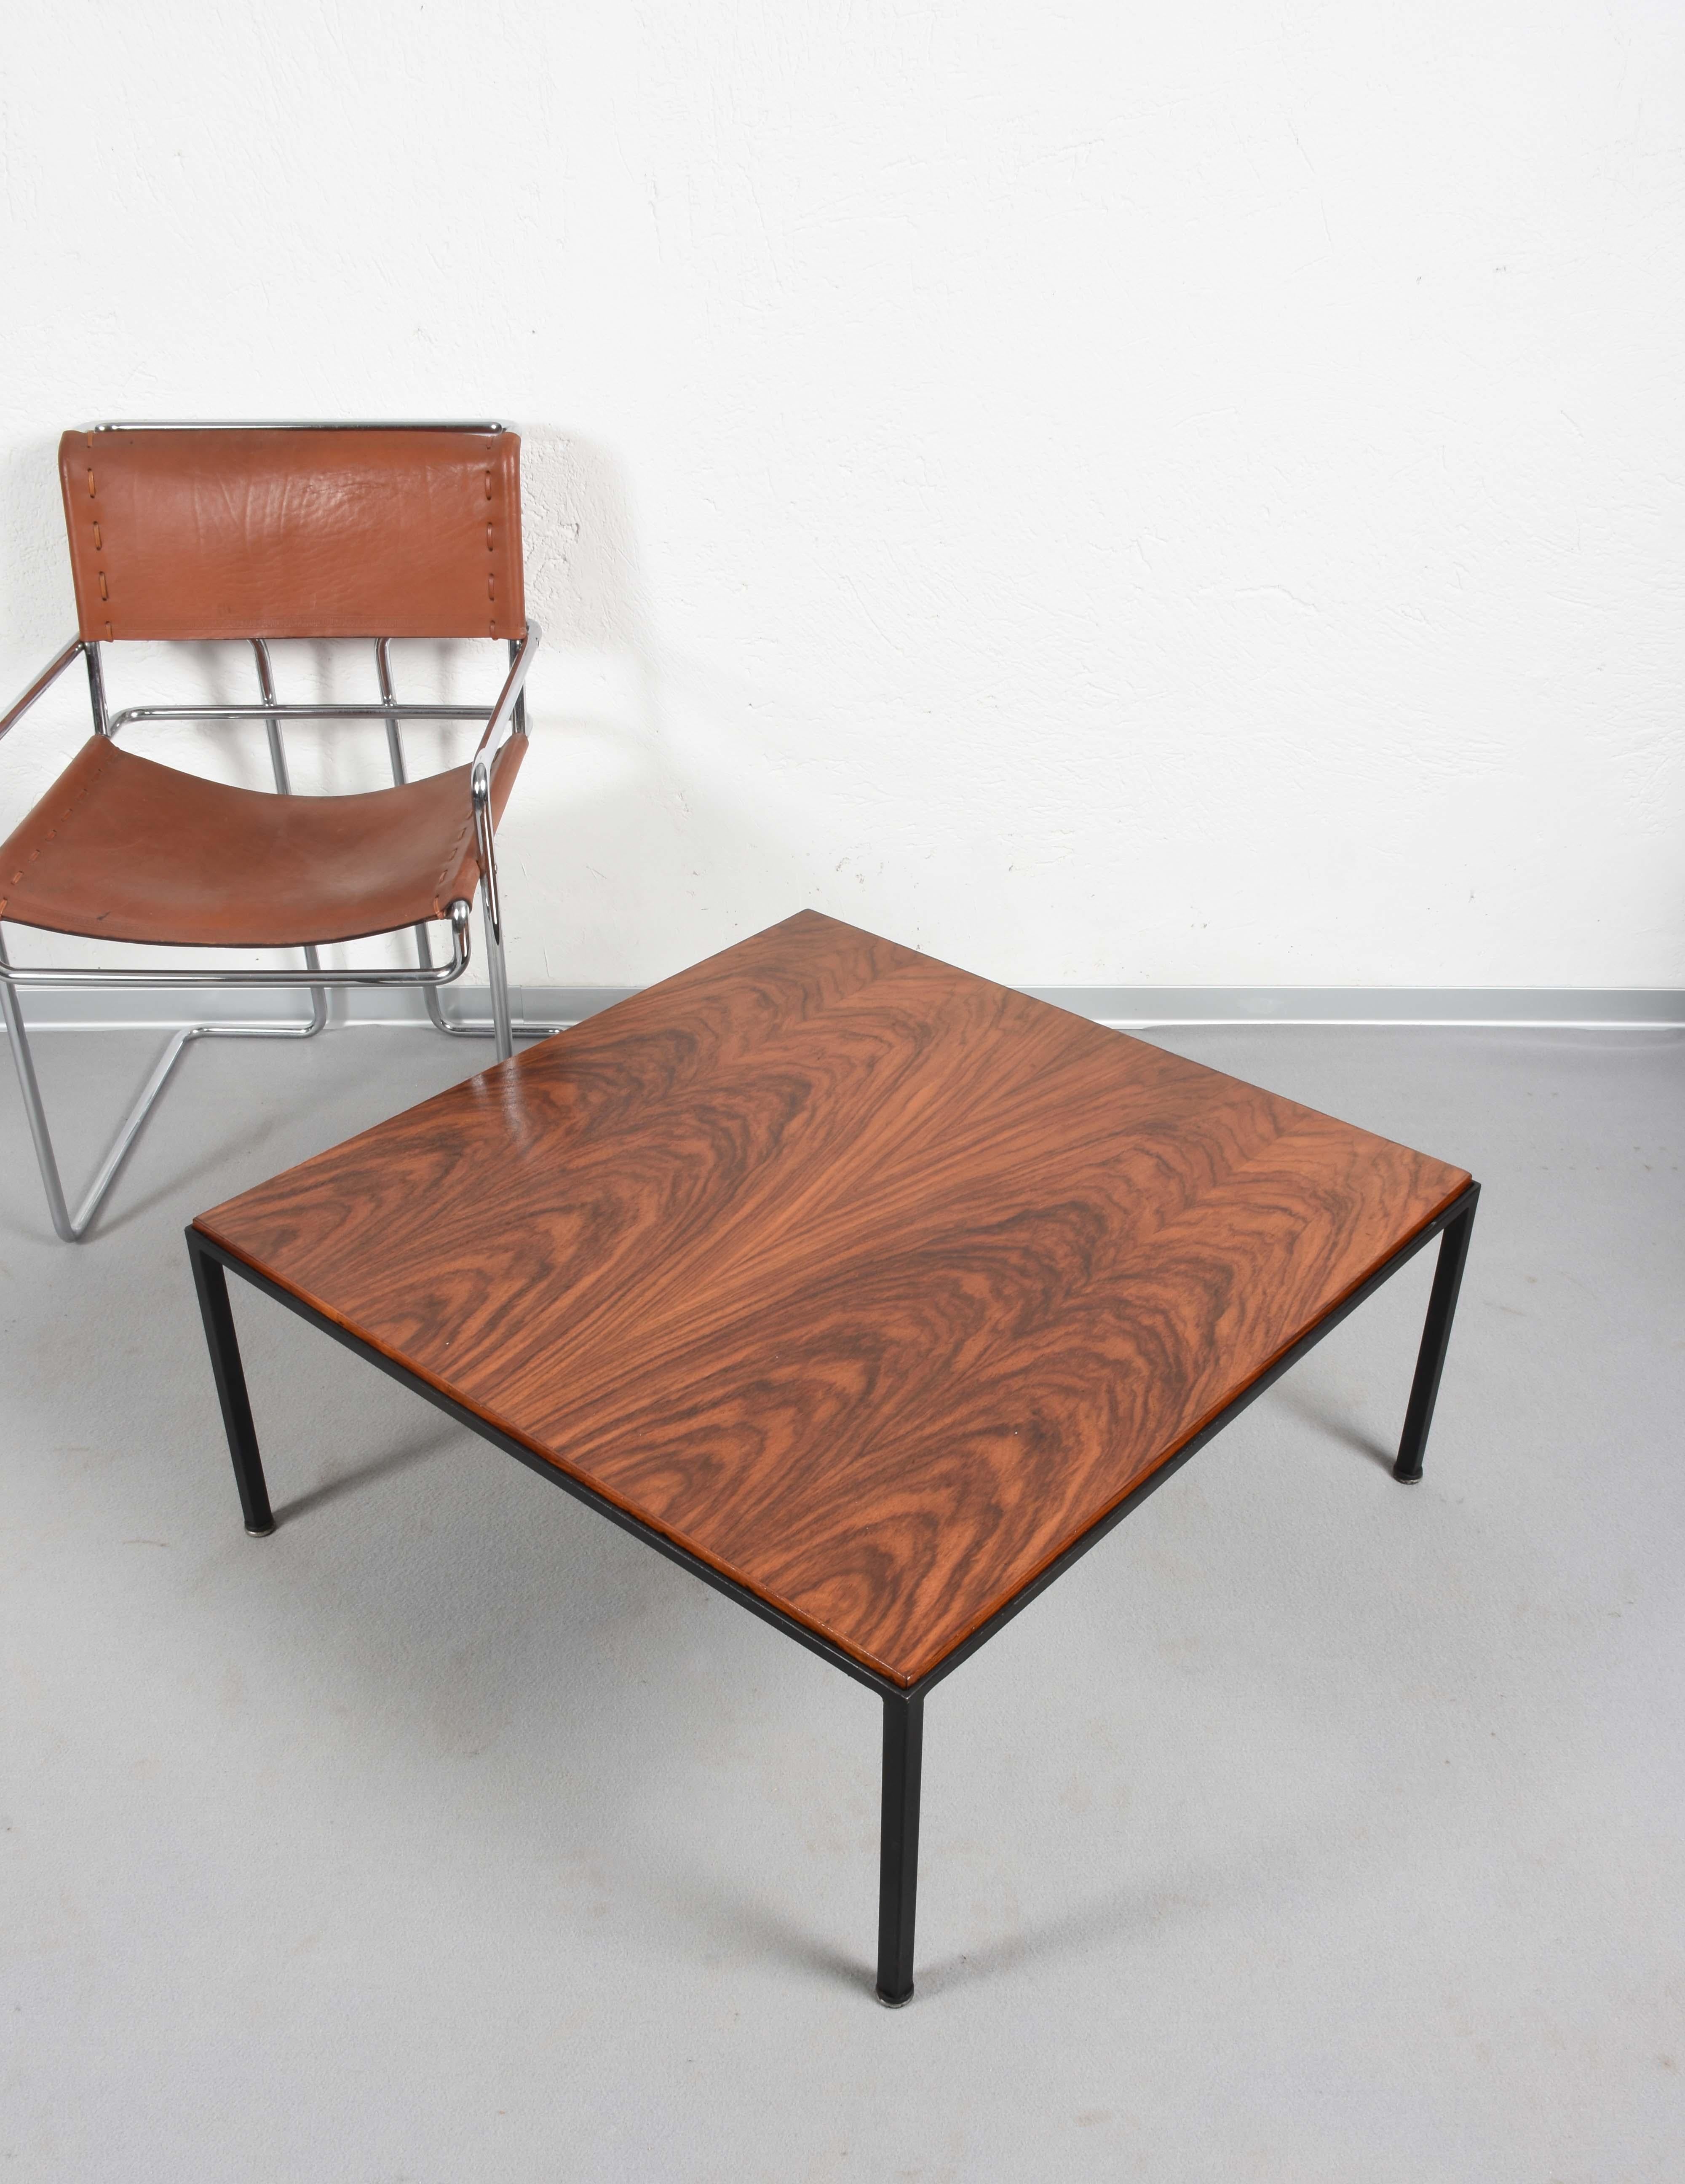 Italian Design Midcentury Wood and Iron Square Coffee Italian Table, 1960s For Sale 4